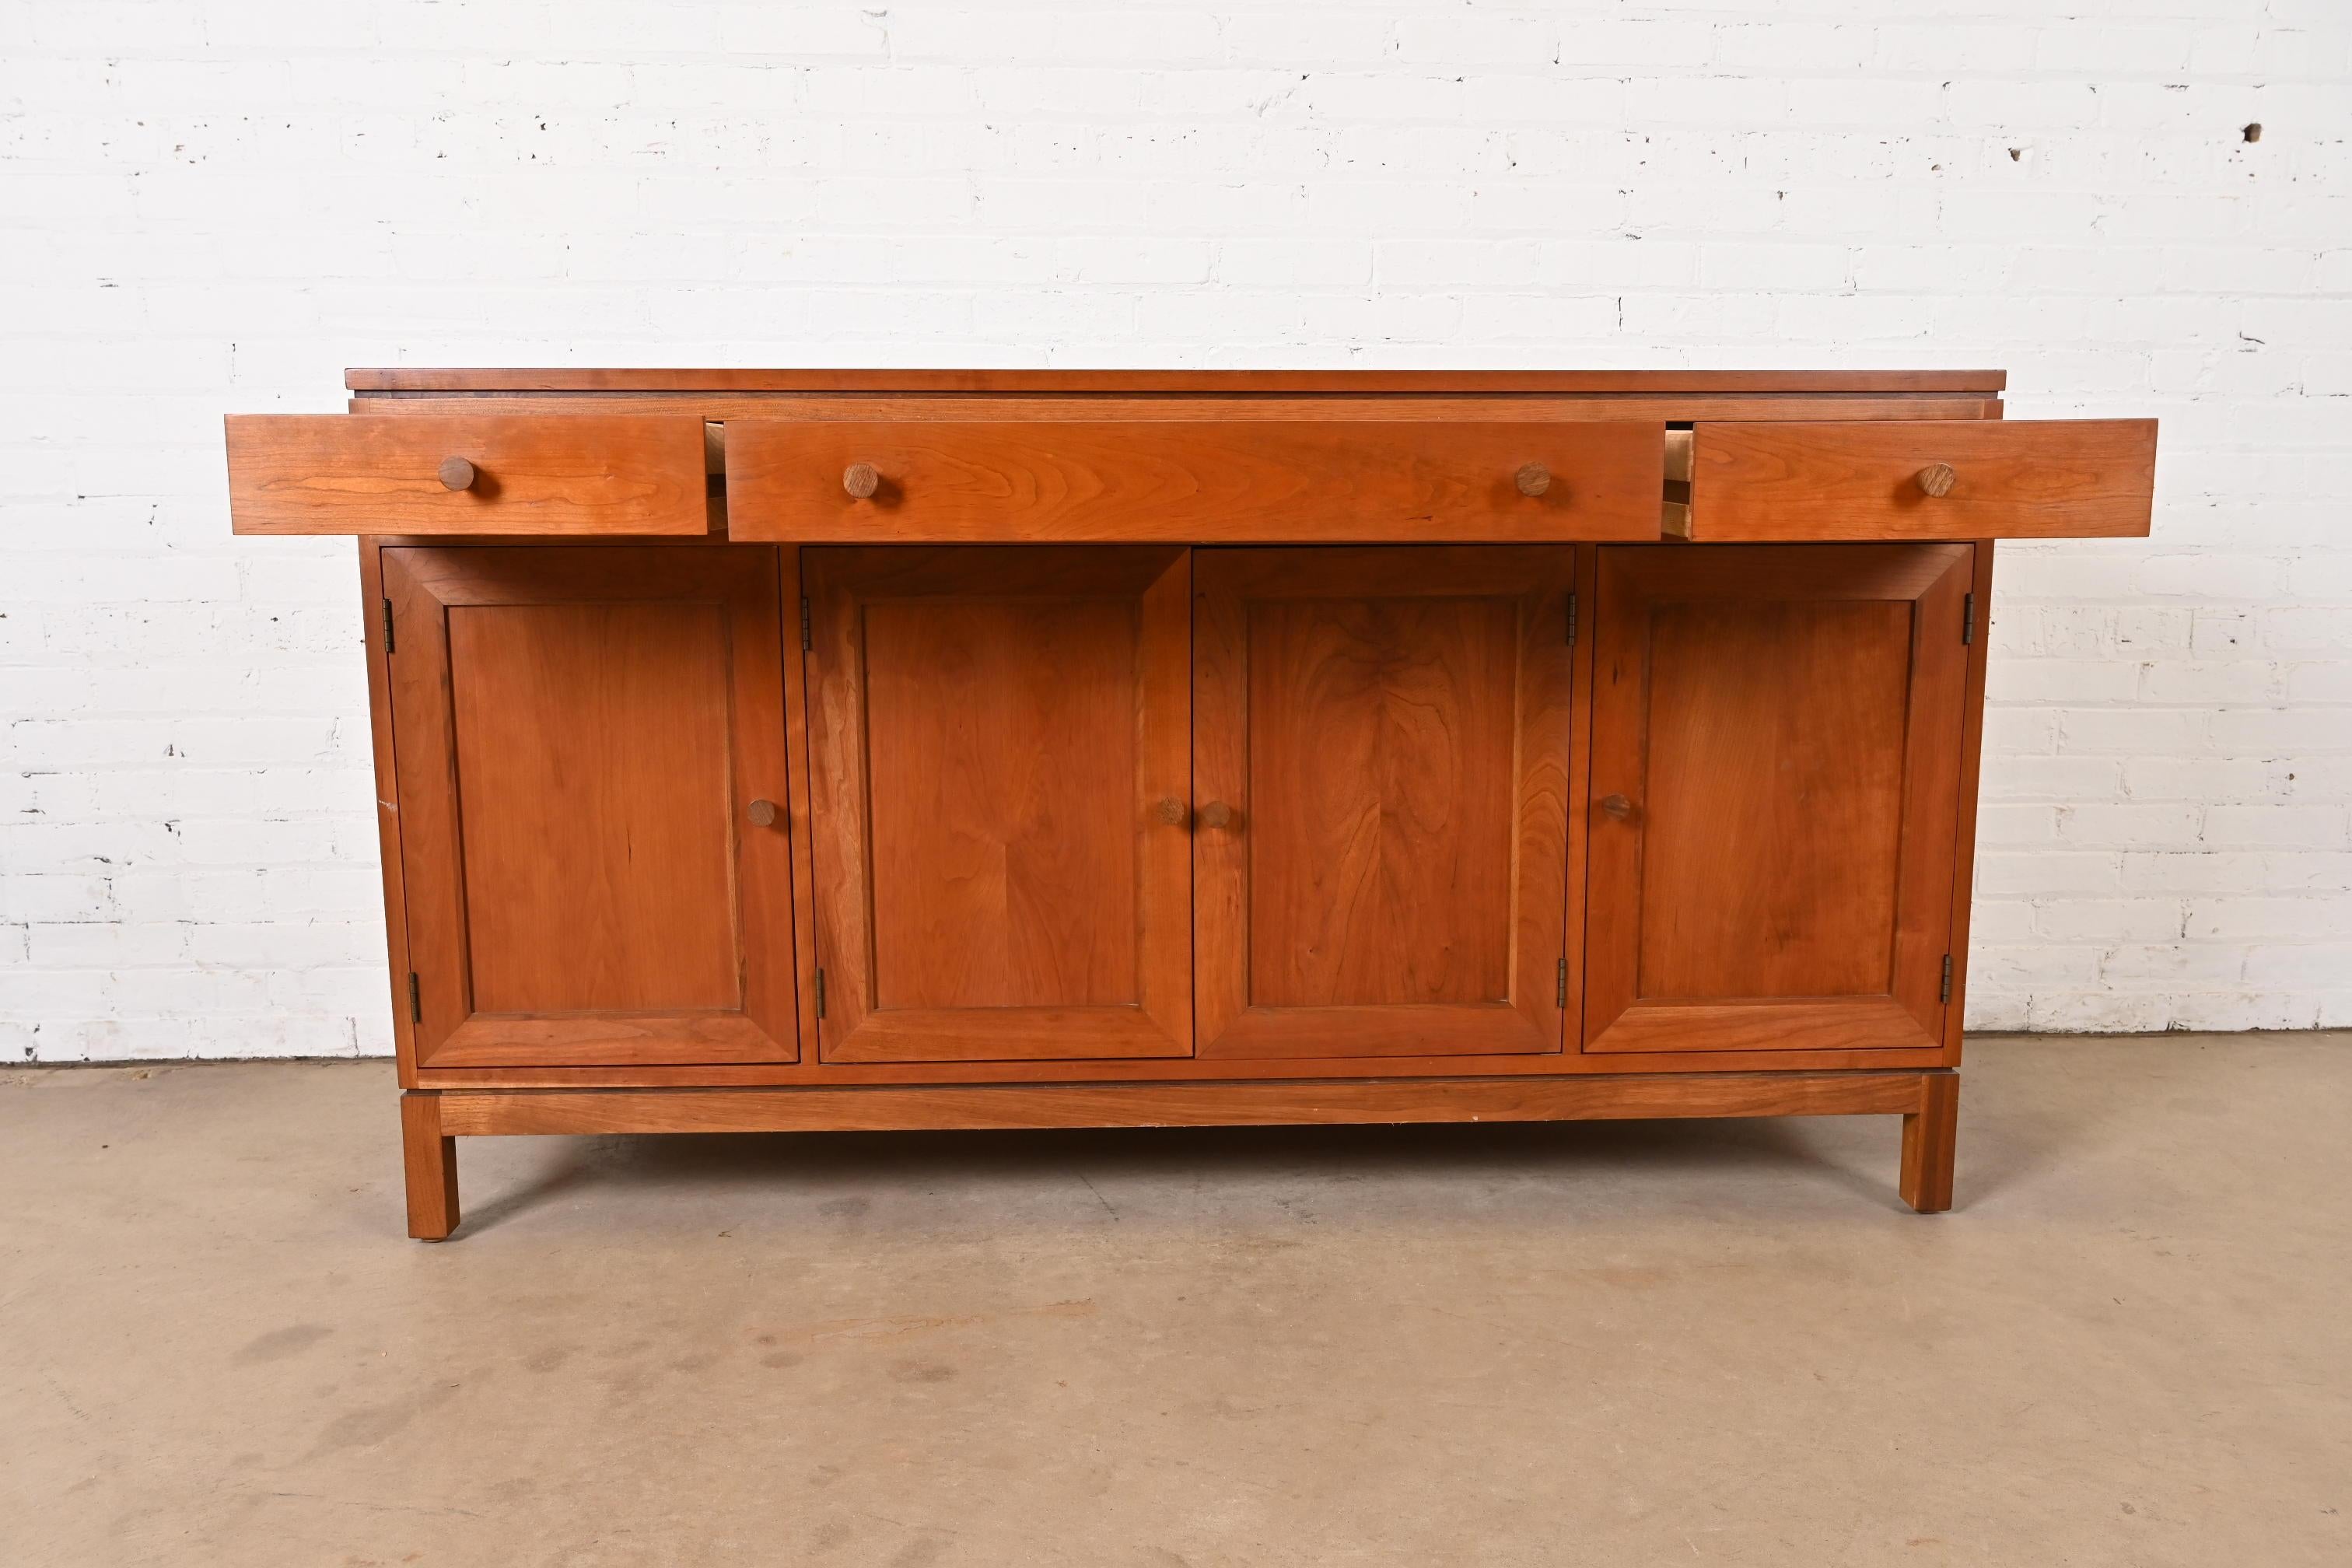 20th Century Stickley Arts & Crafts Shaker Cherry Wood Sideboard or Bar Cabinet For Sale